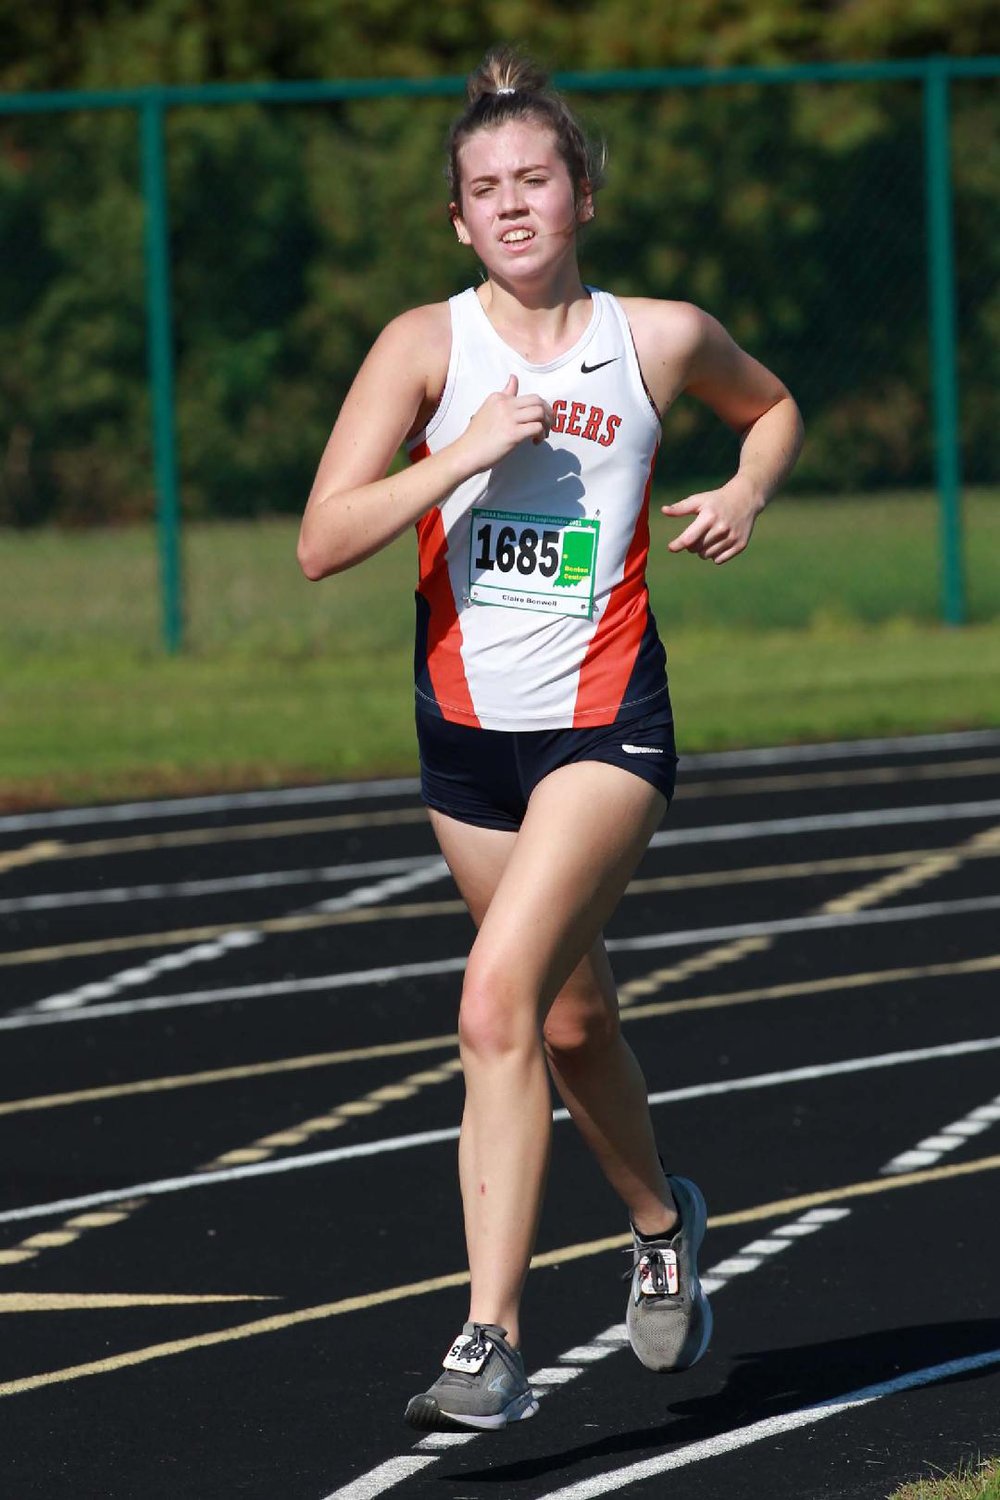 North Montgomery's Claire Bonwell advanced to the regional with a 15th-place finish at the sectional on Saturday at Benton Central.